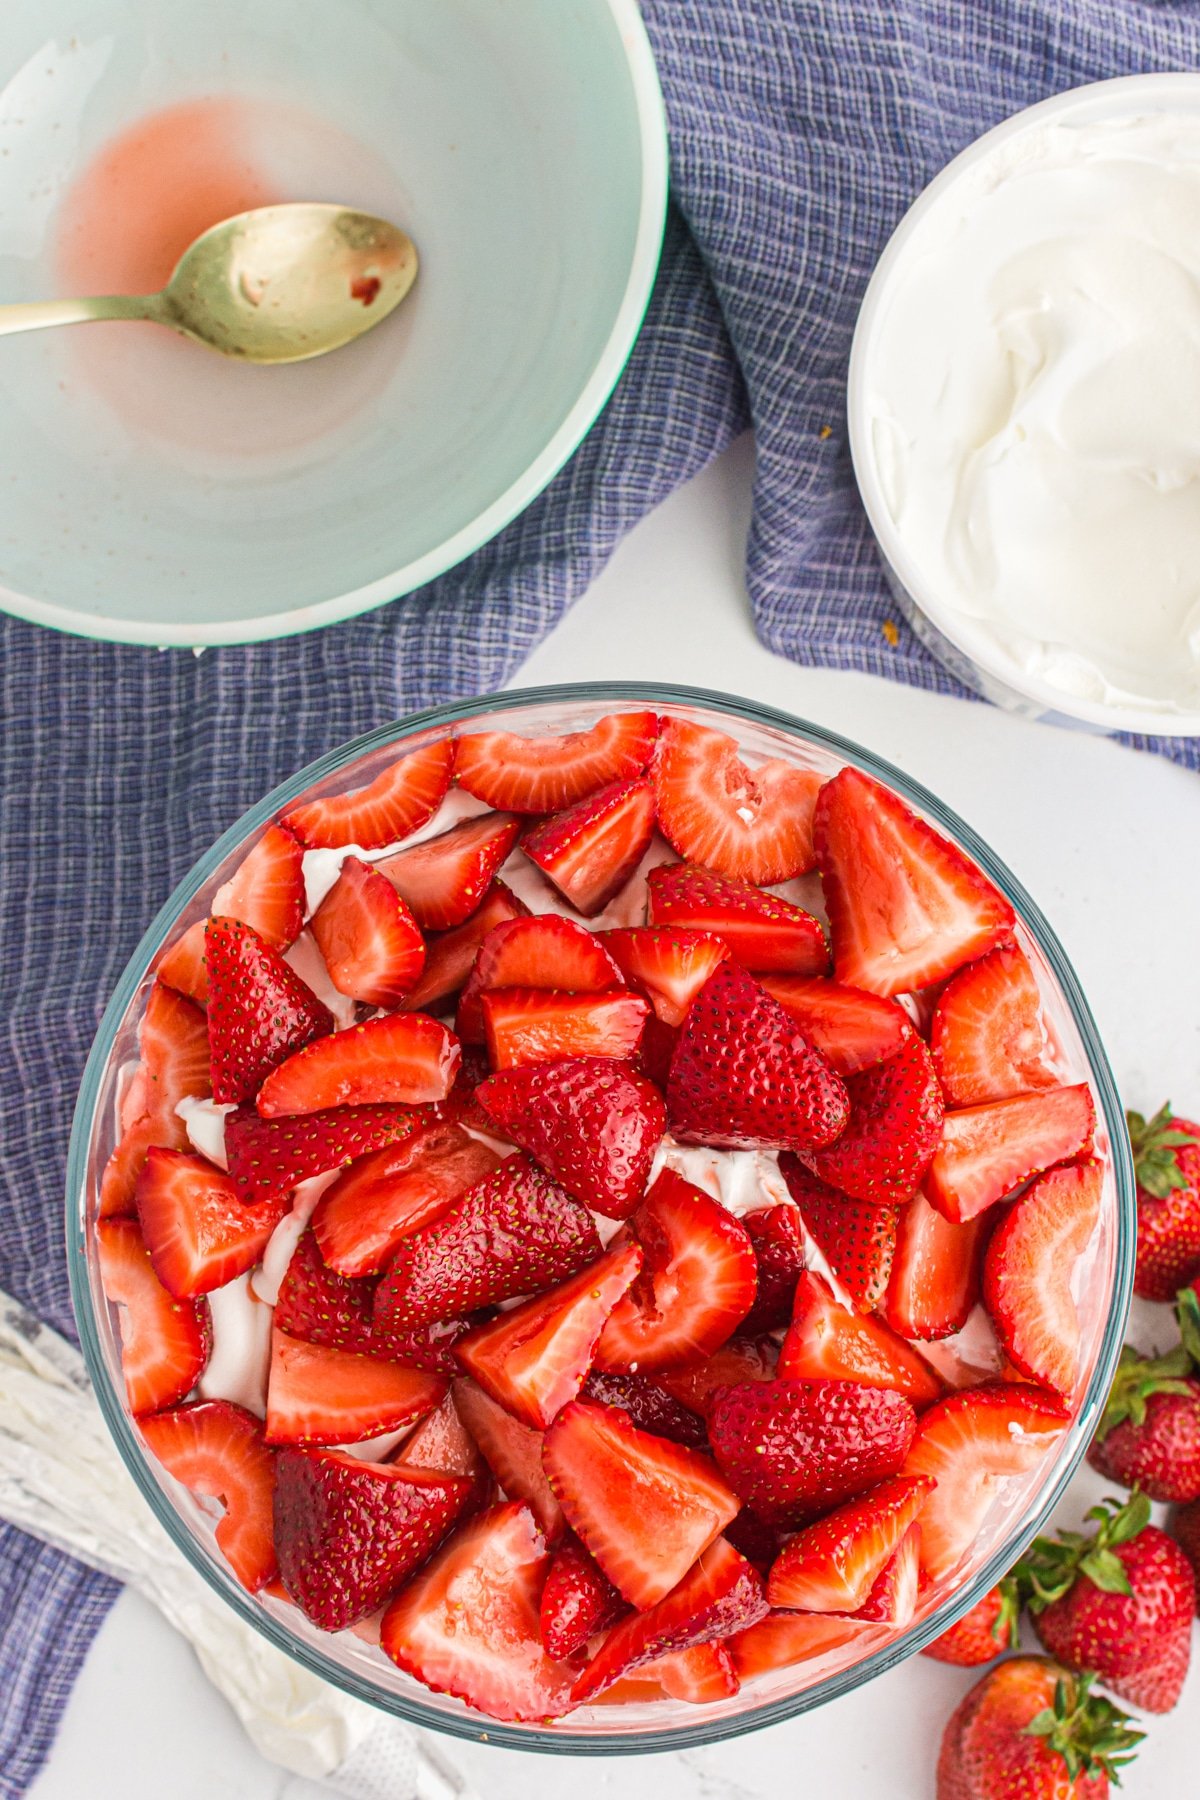 Layering with strawberries.